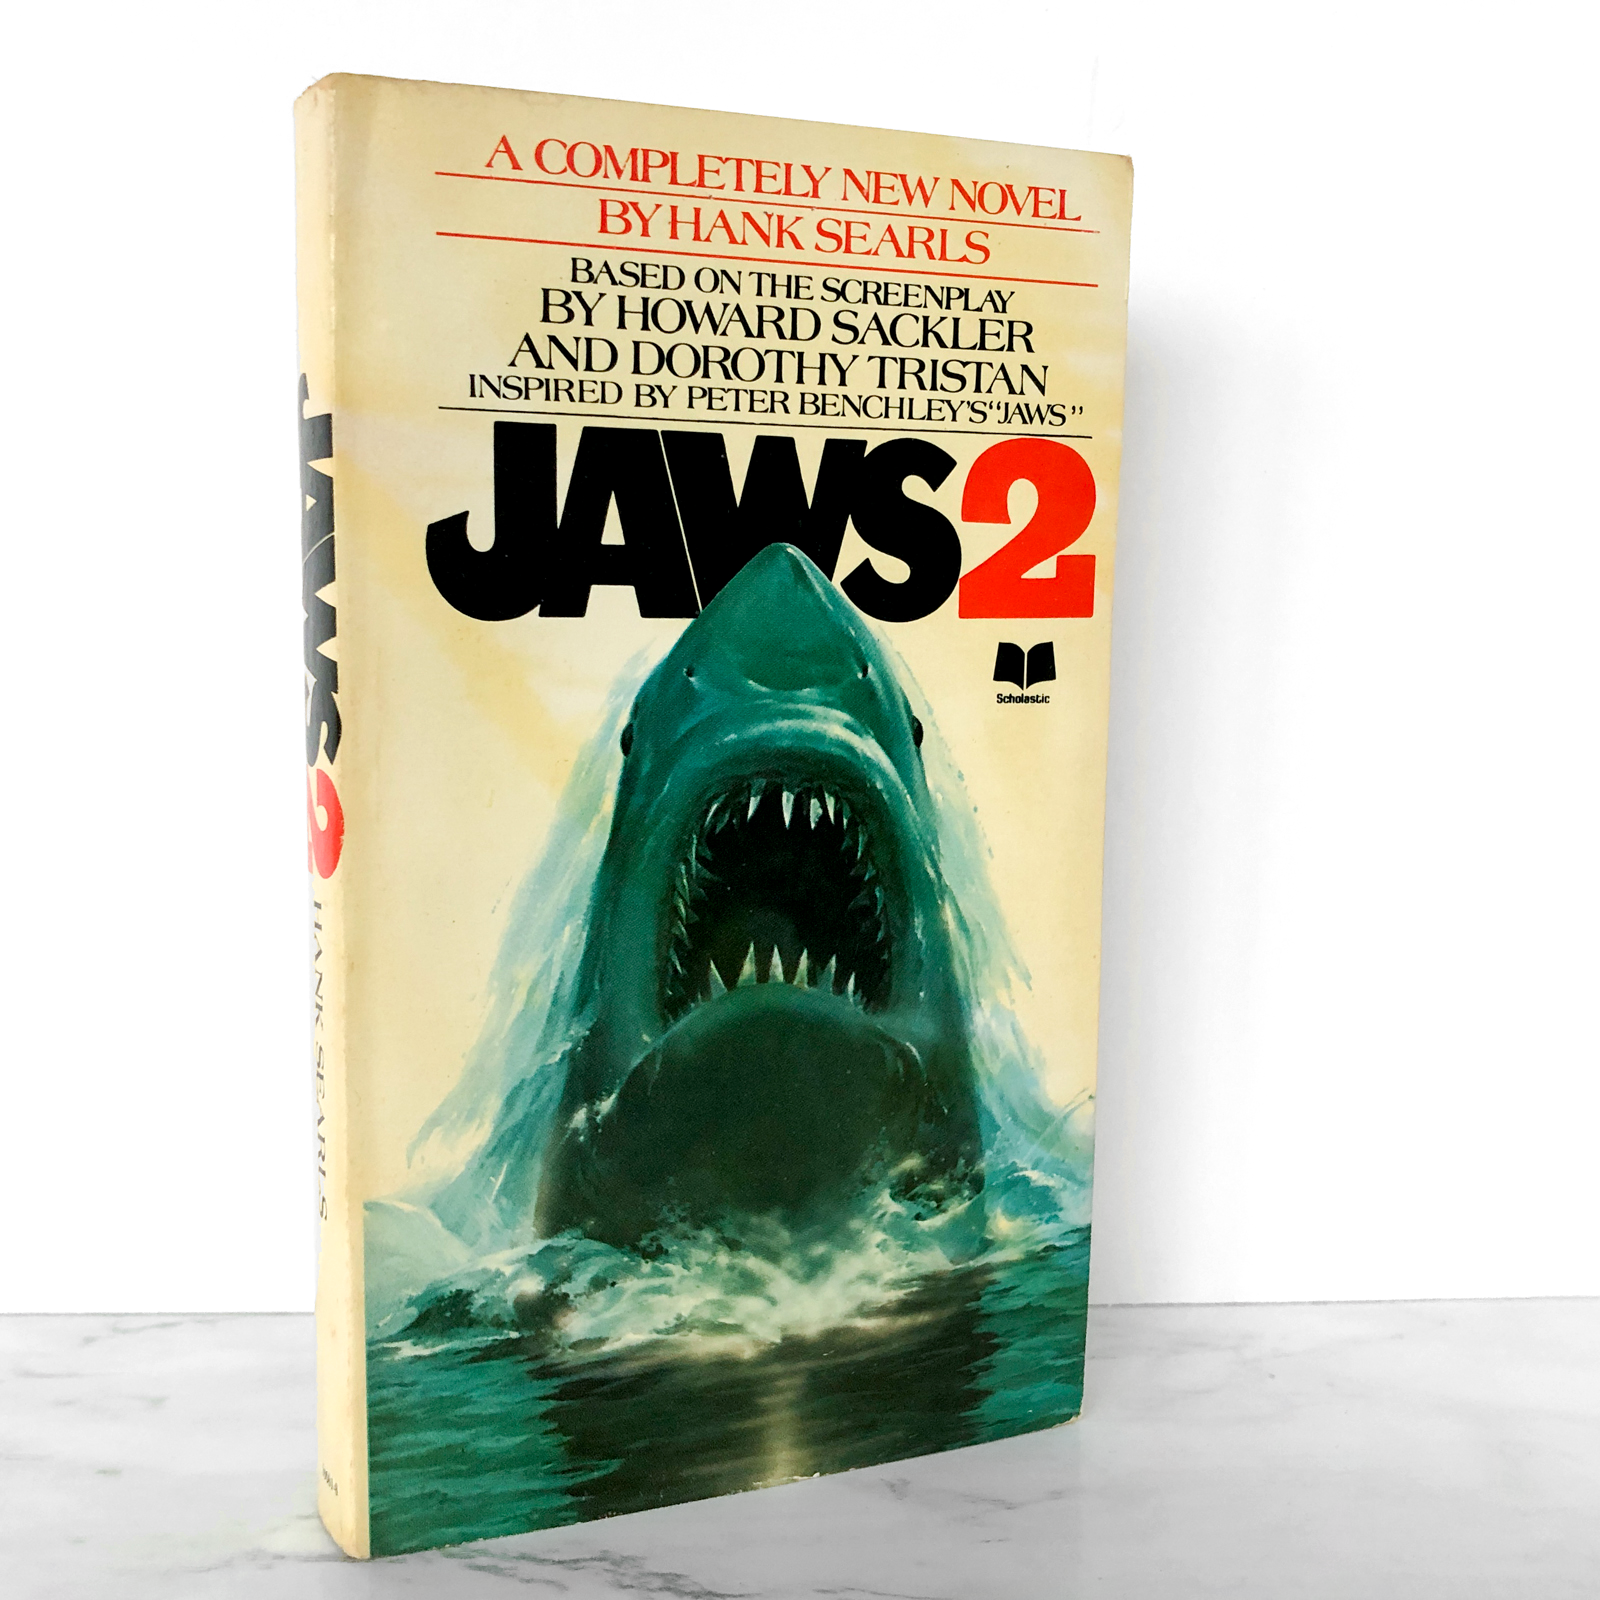 Hank　Searls　Jaws　PAPERBACK]　by　[1978